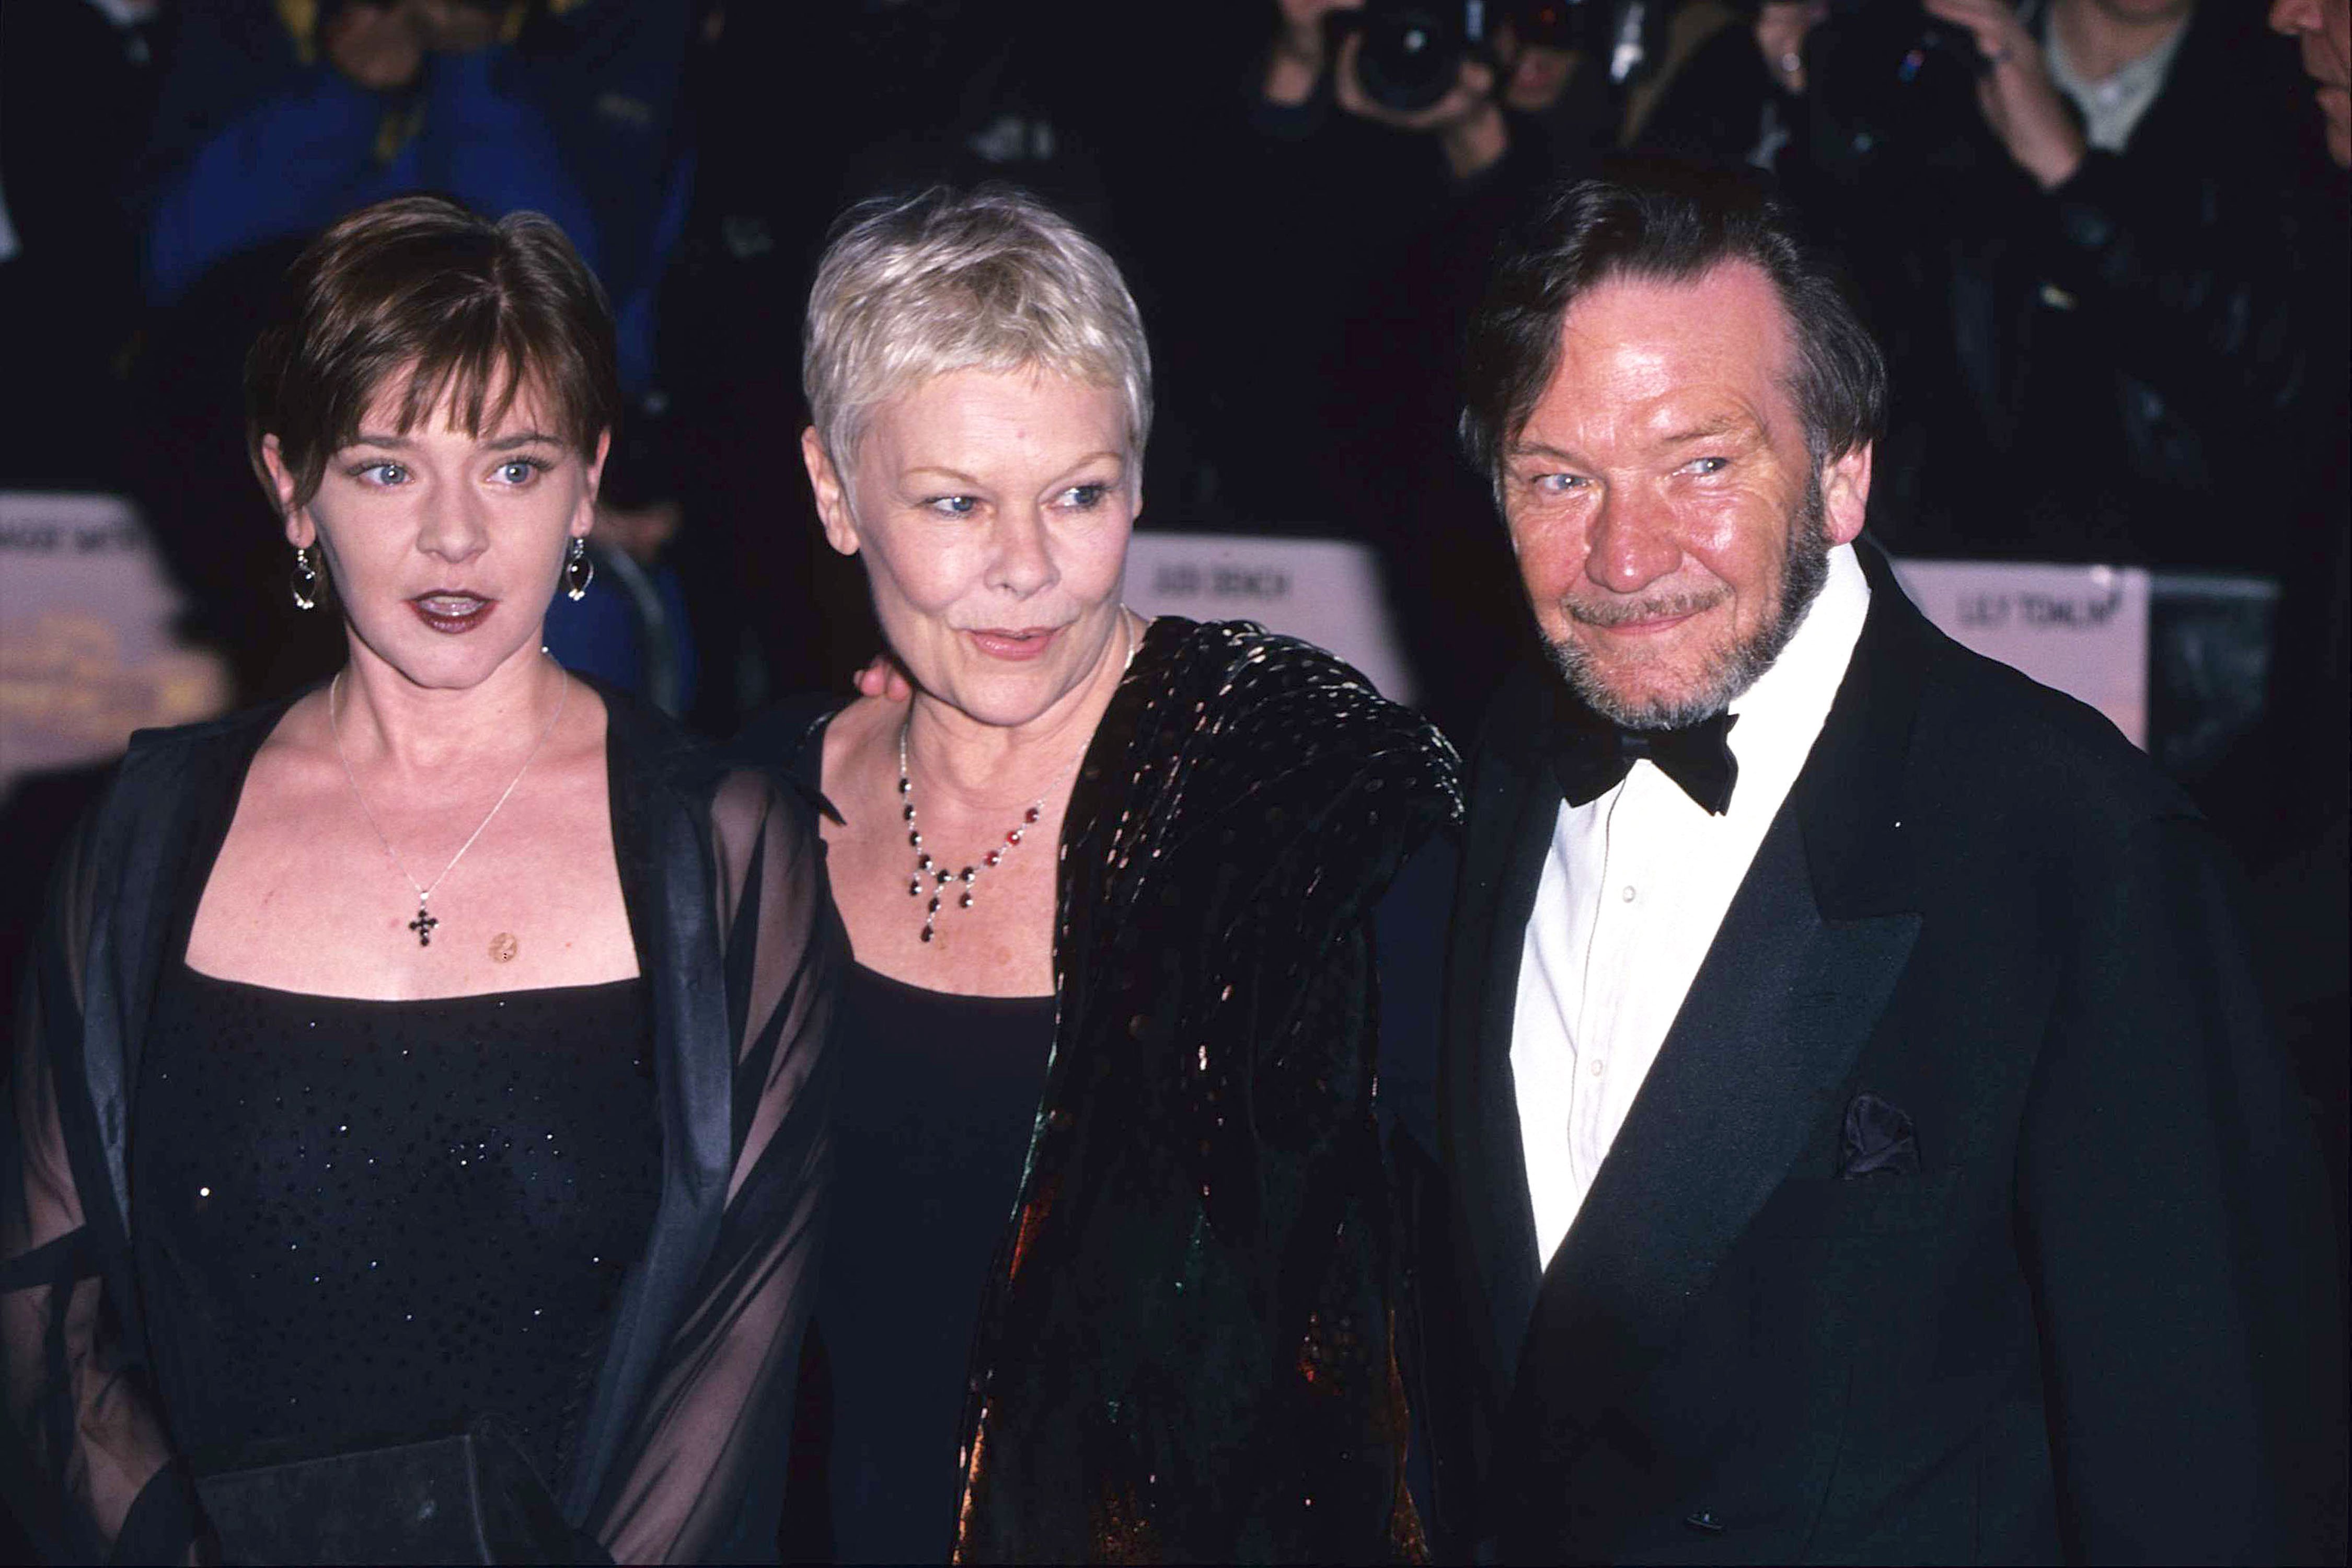 Judi Dench pictured with daughter Finty Williams and husband Michael Williams attend the "Tea with Mussolini" Royal World premiere on March 1, 1999 ┃Source: Getty Images